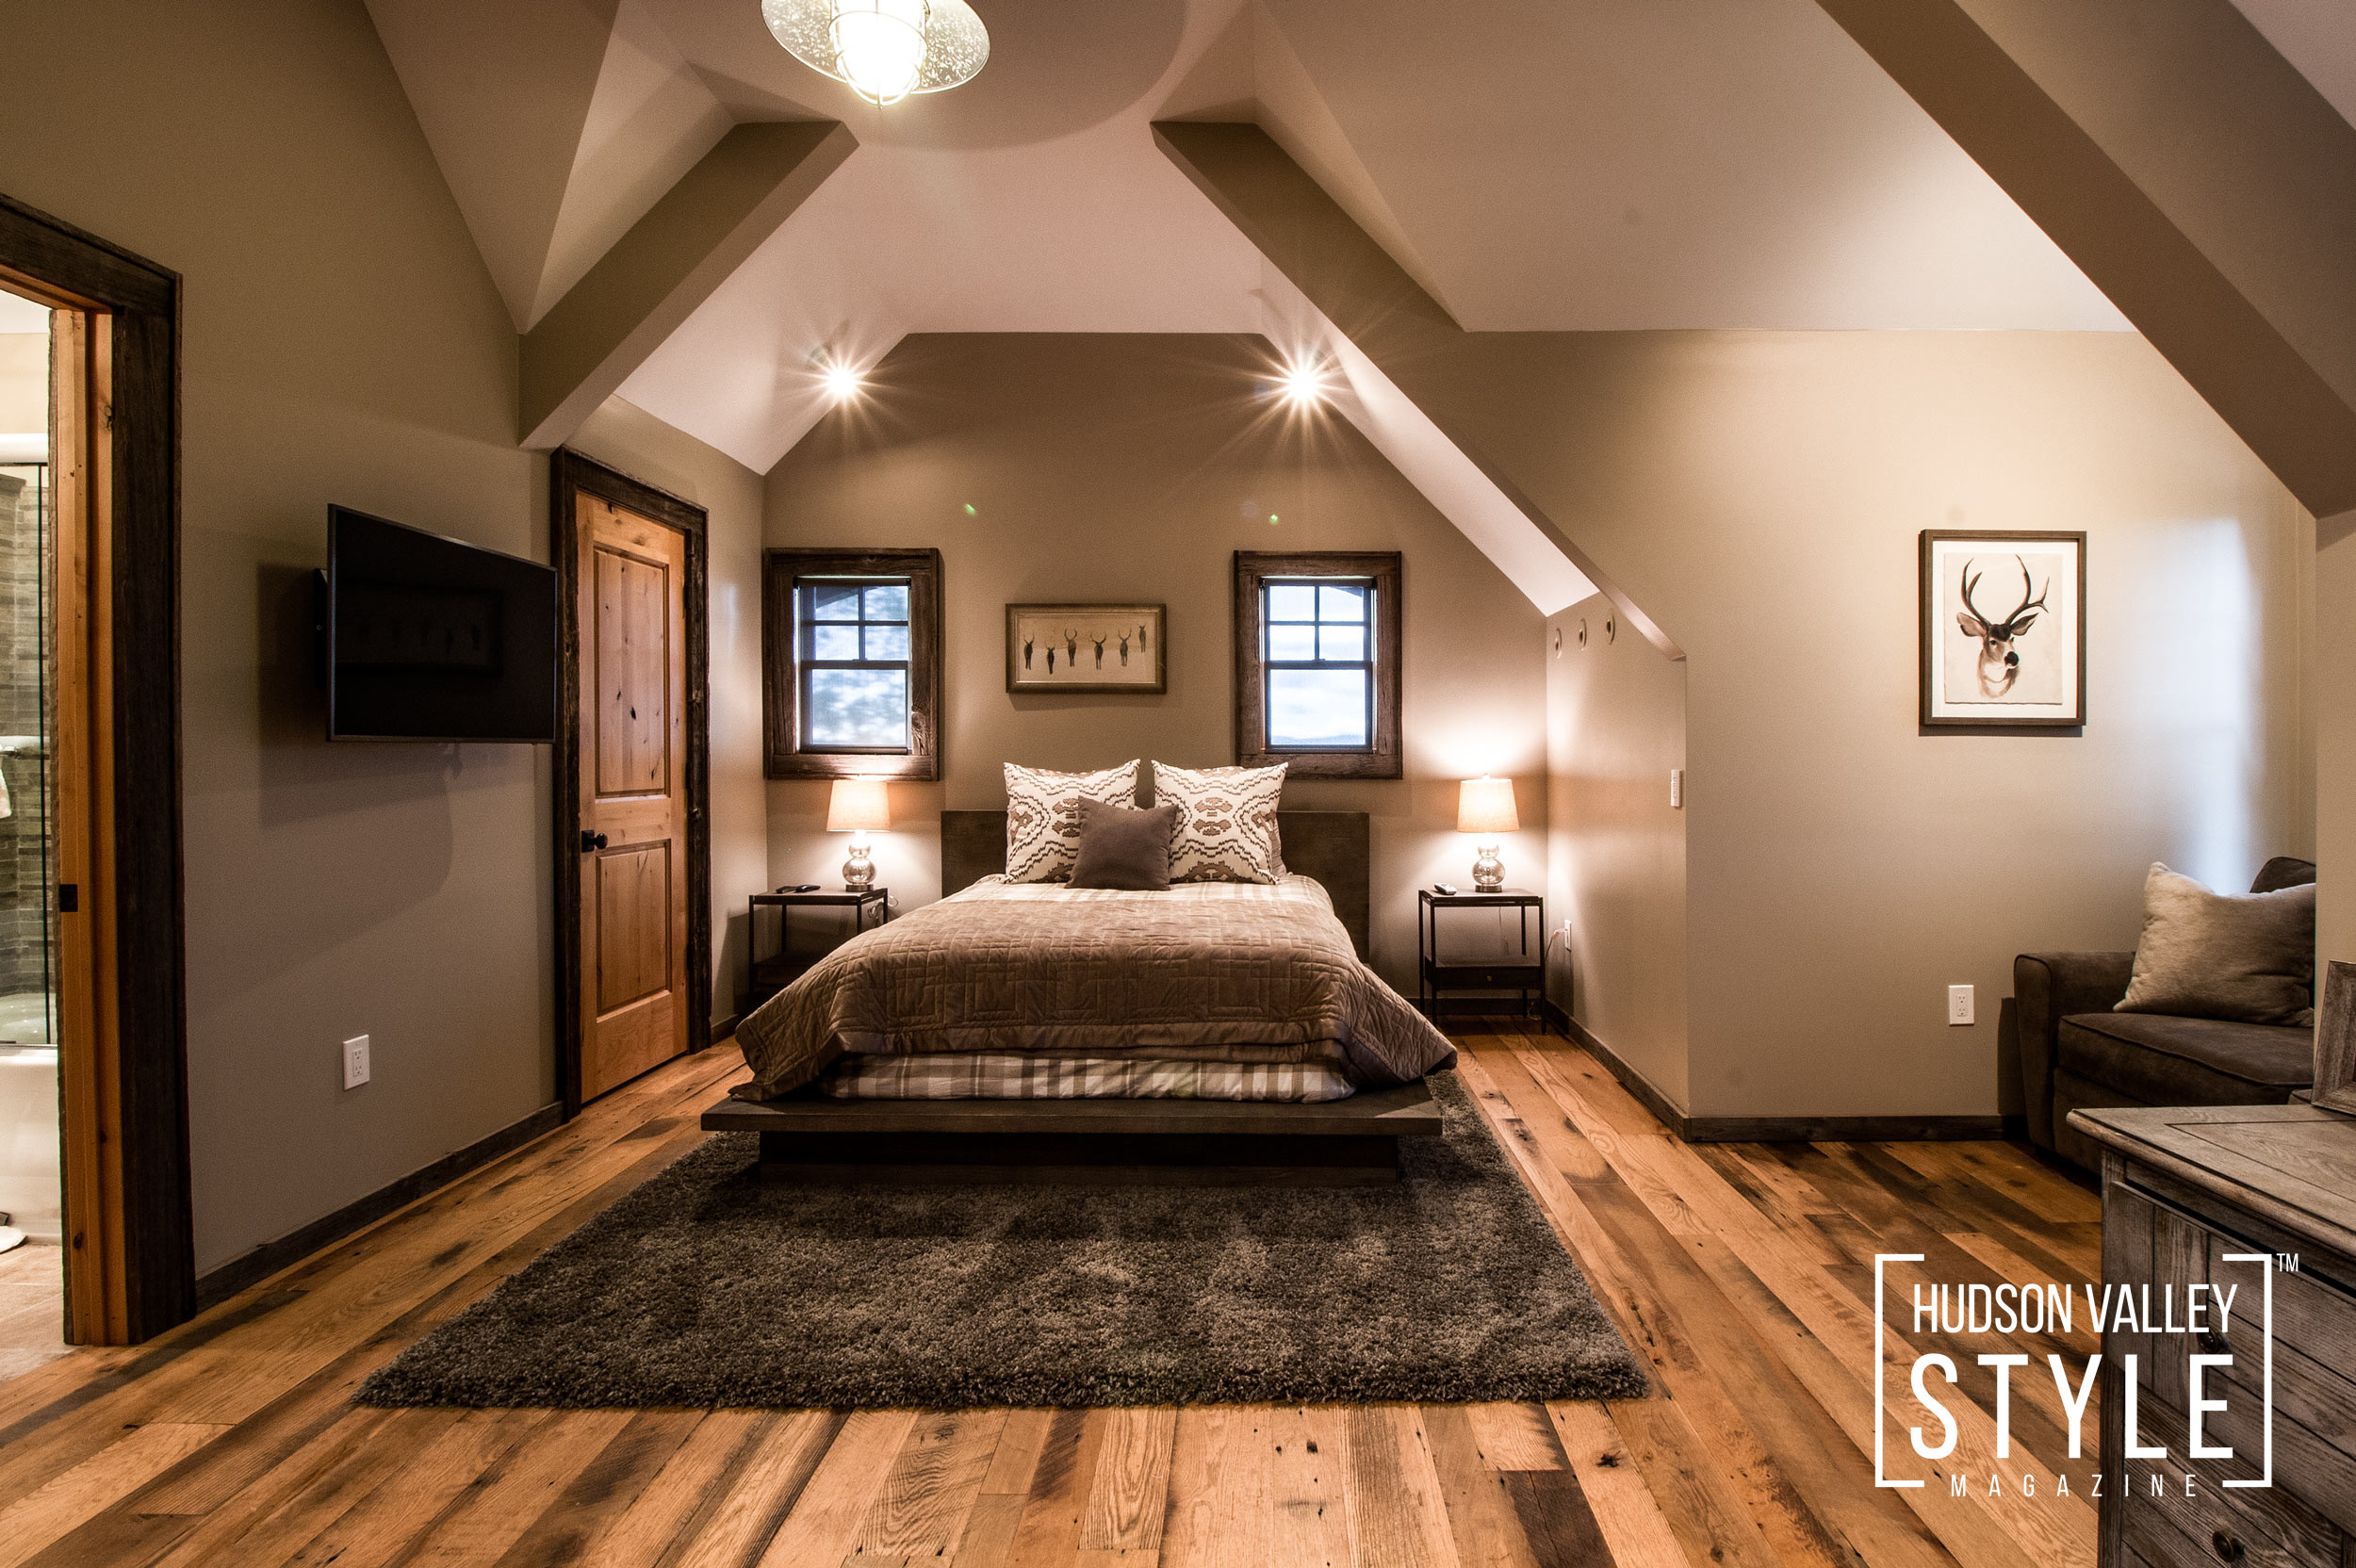 Luxurious Hunter’s Cabin in Catskill Mountains – Photo Story by Maxwell Alexander - Duncan Avenue Photography Studio - Hudson Valley Real Estate Photography